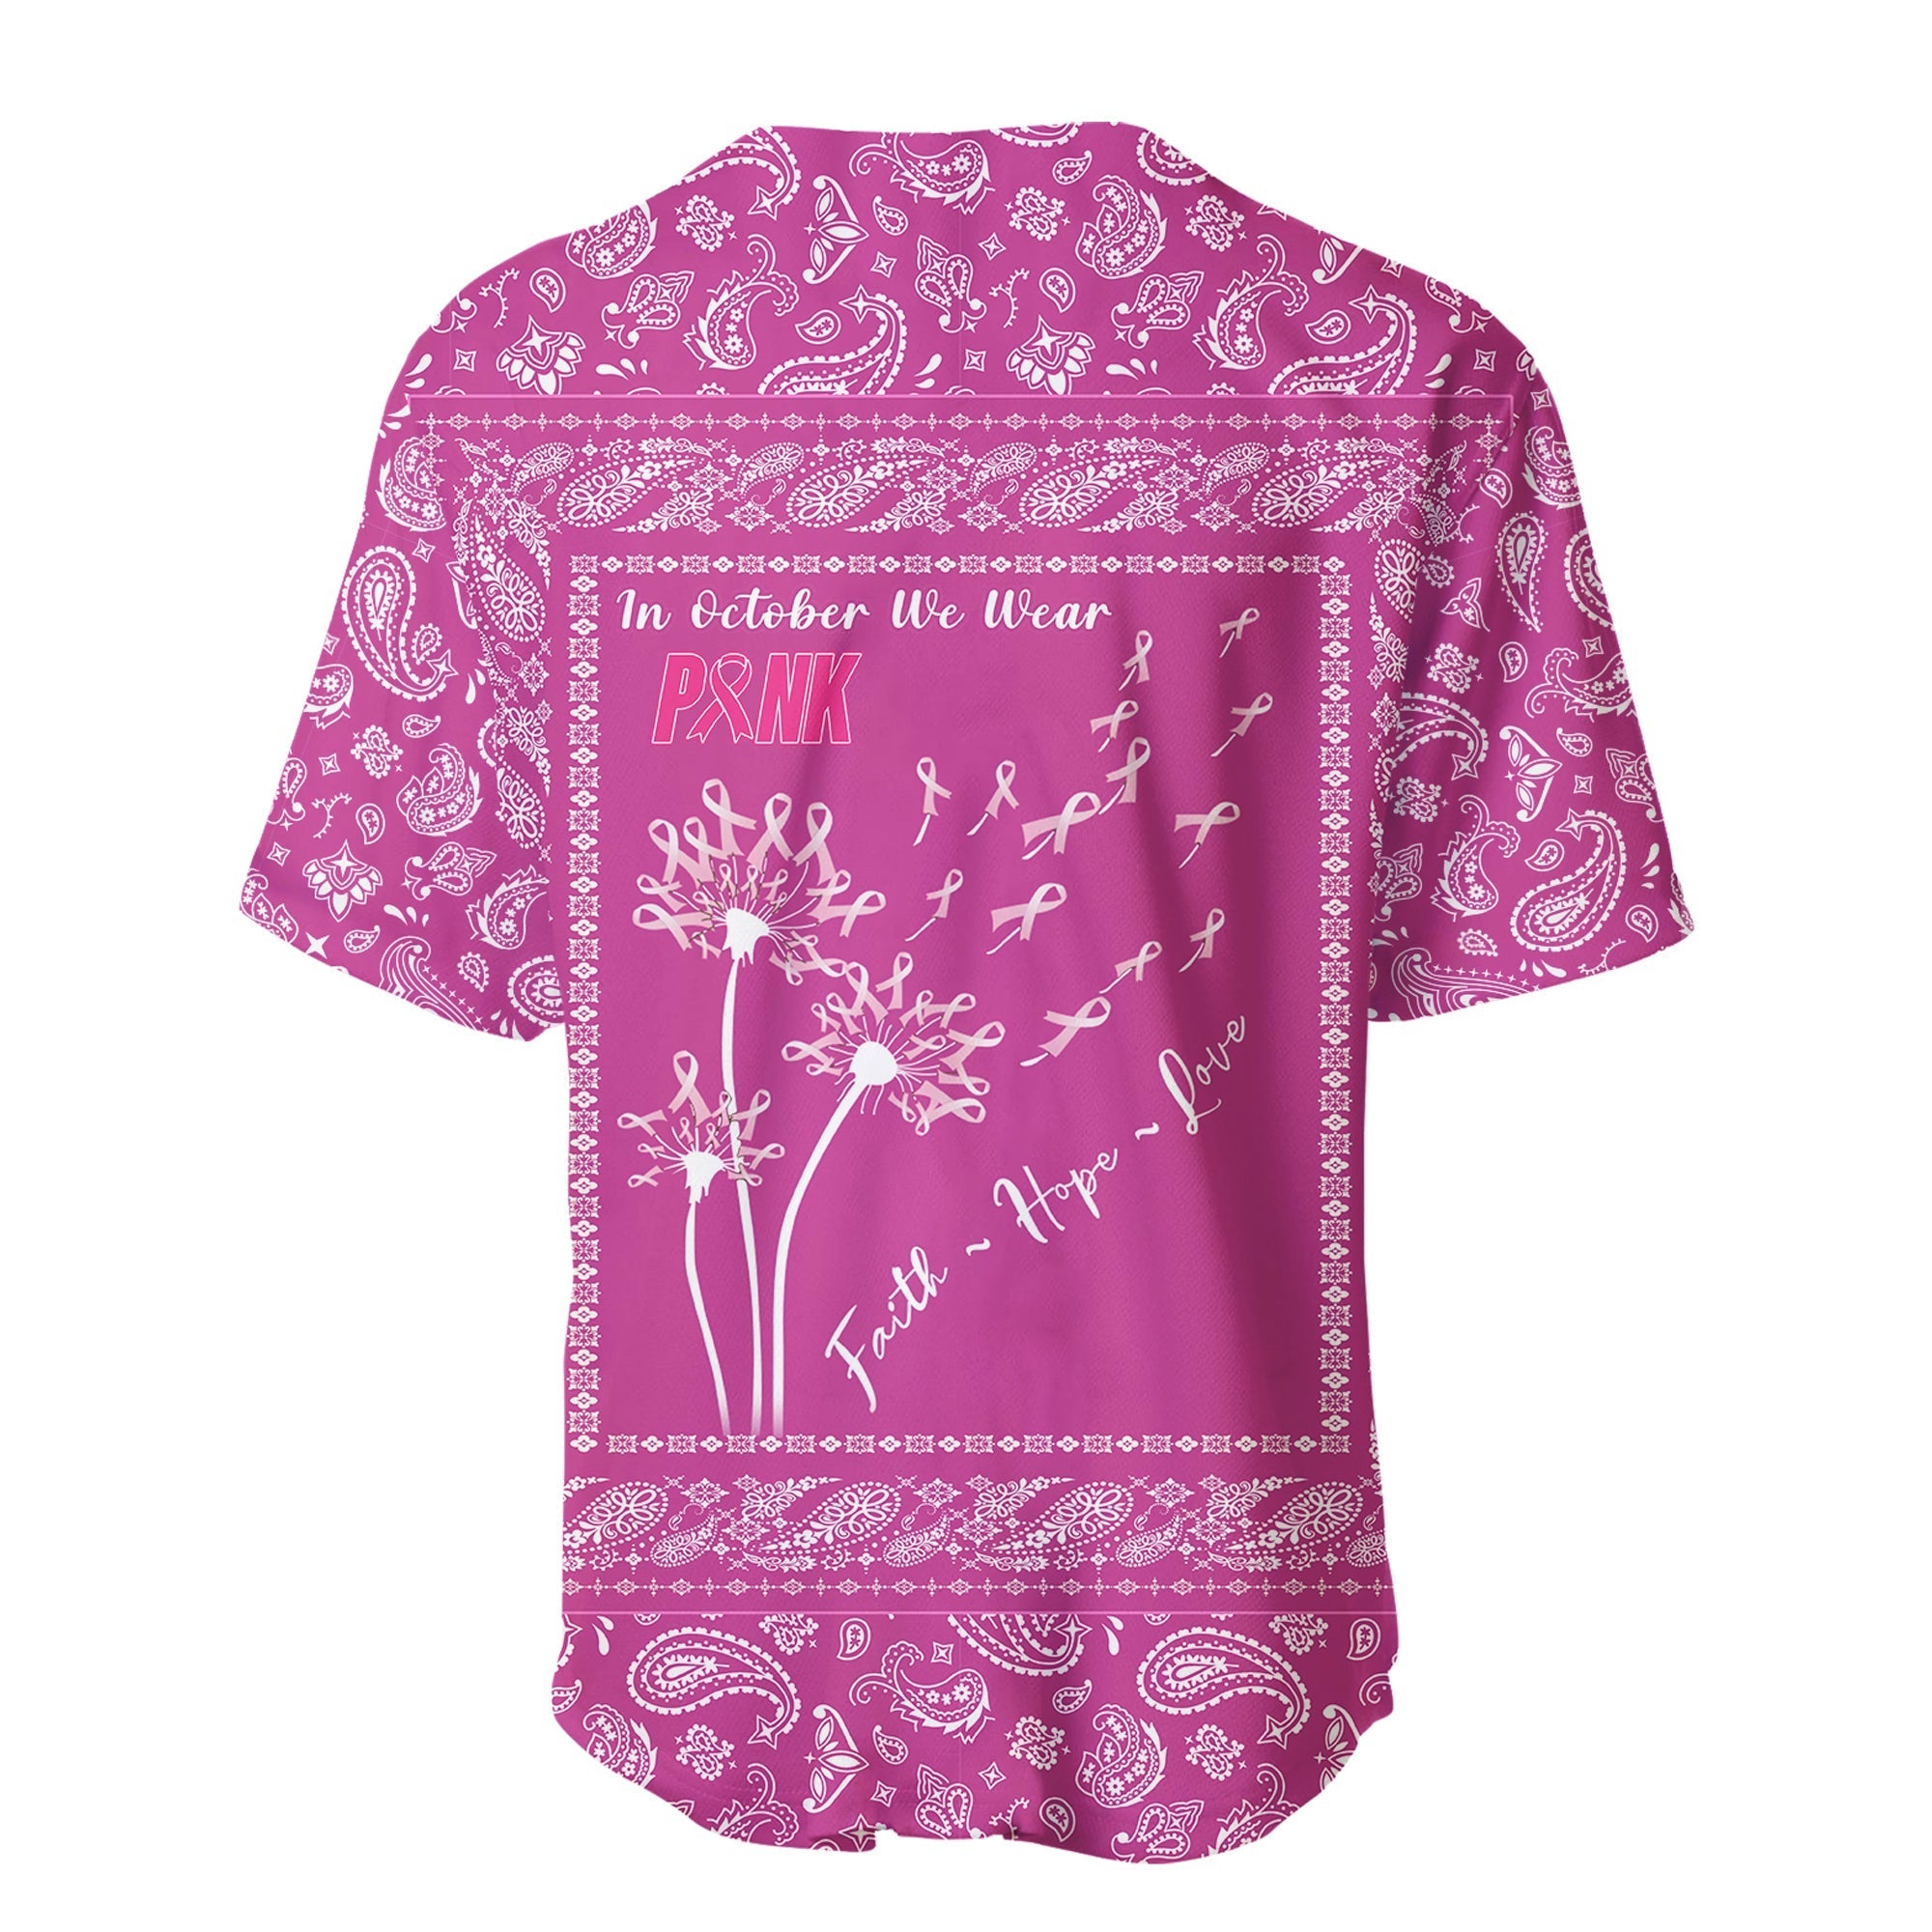 custom-personalised-breast-cancer-baseball-jersey-pink-paisley-pattern-in-october-we-wear-pink